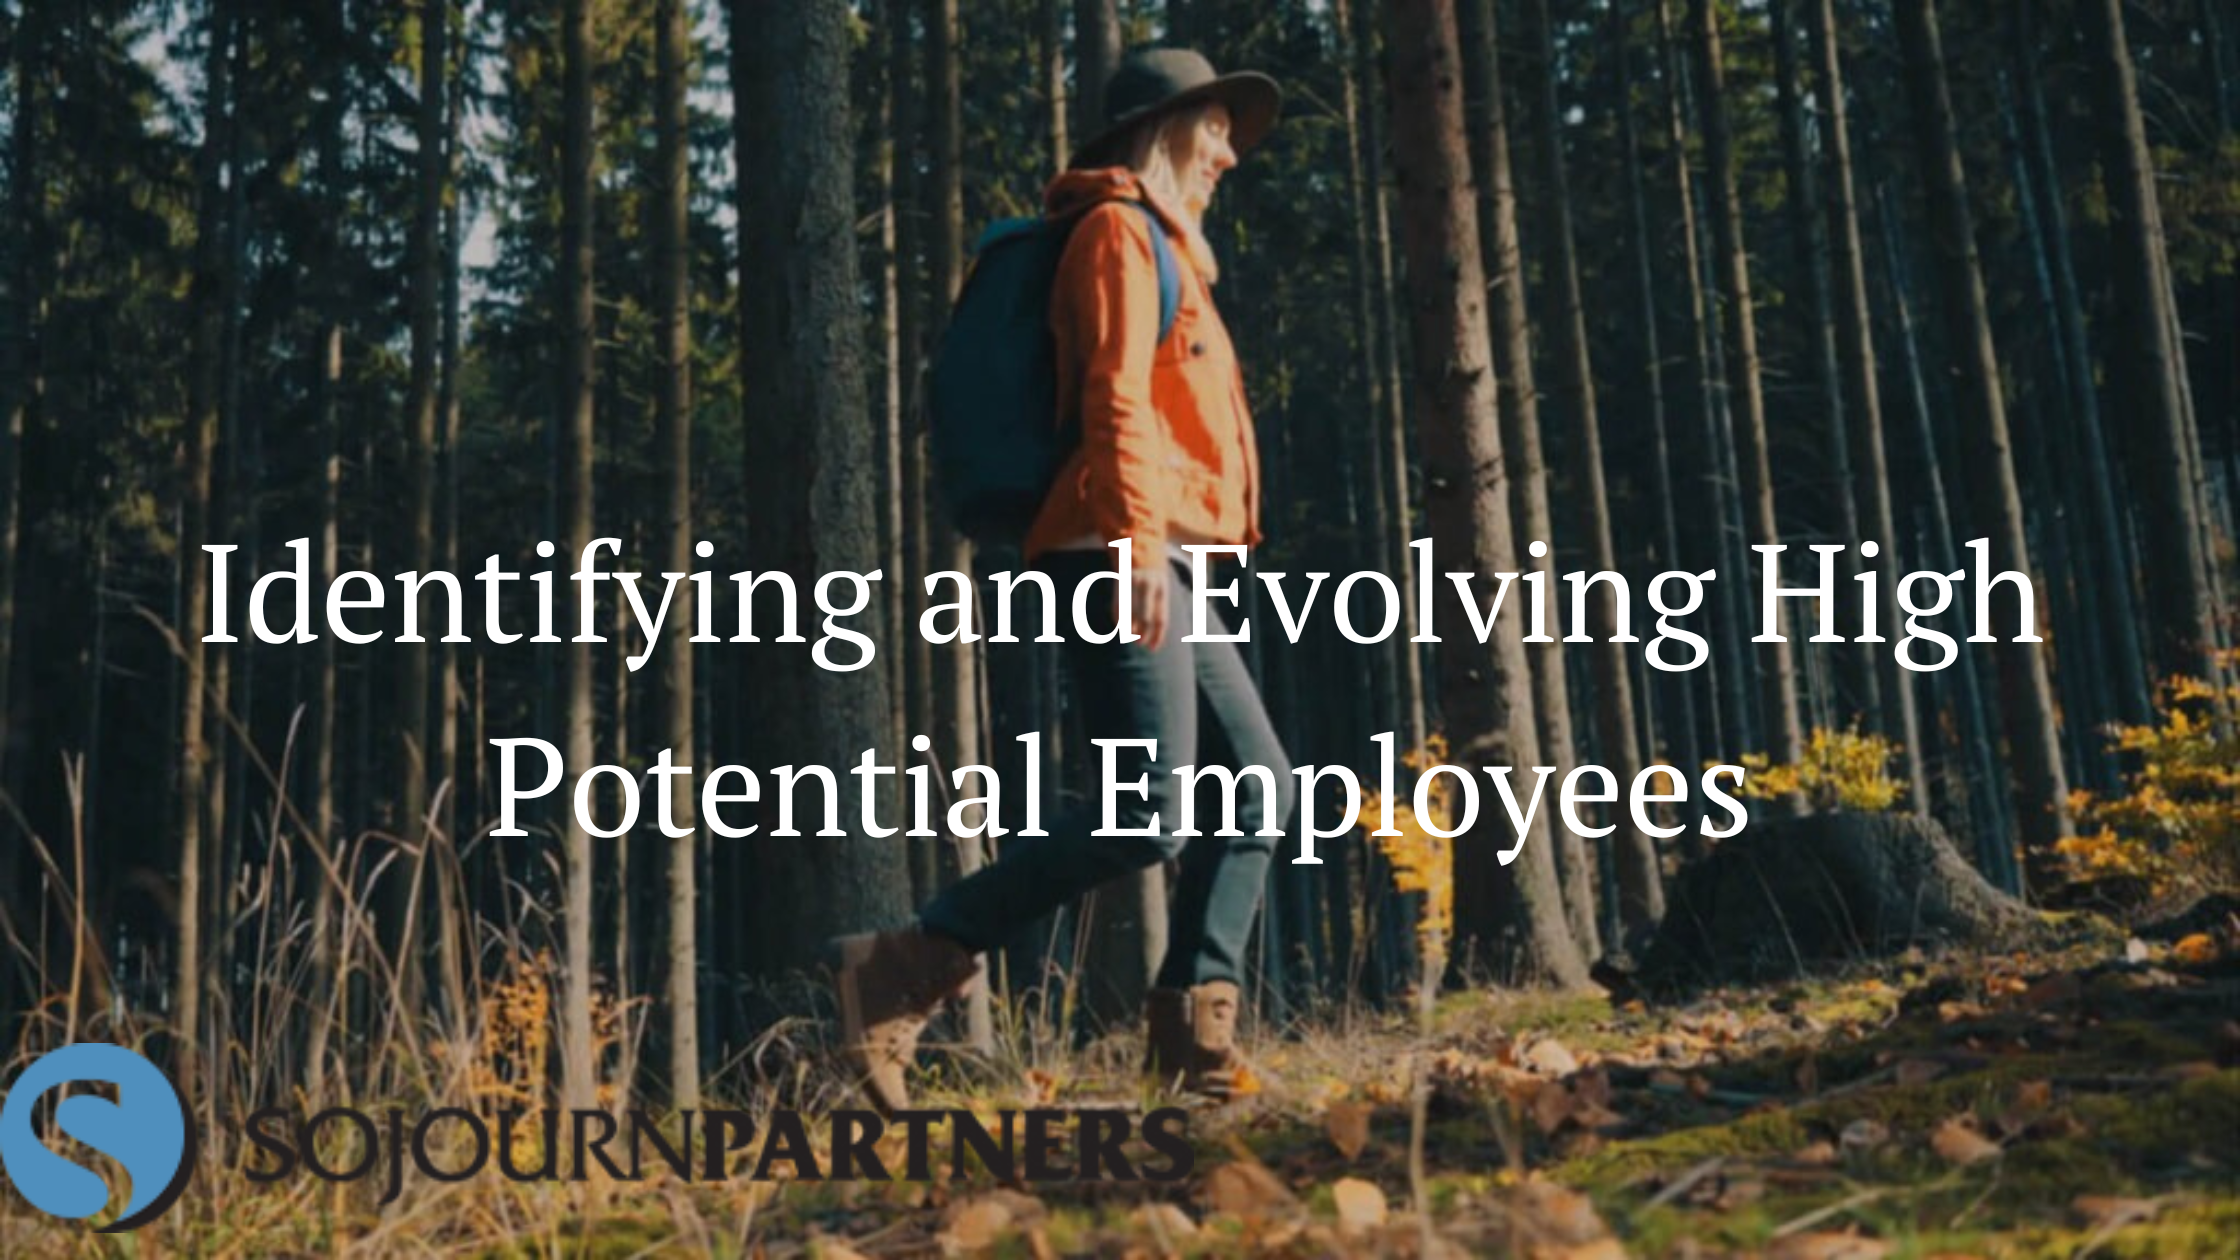 Identifying and Evolving High Potential Employees